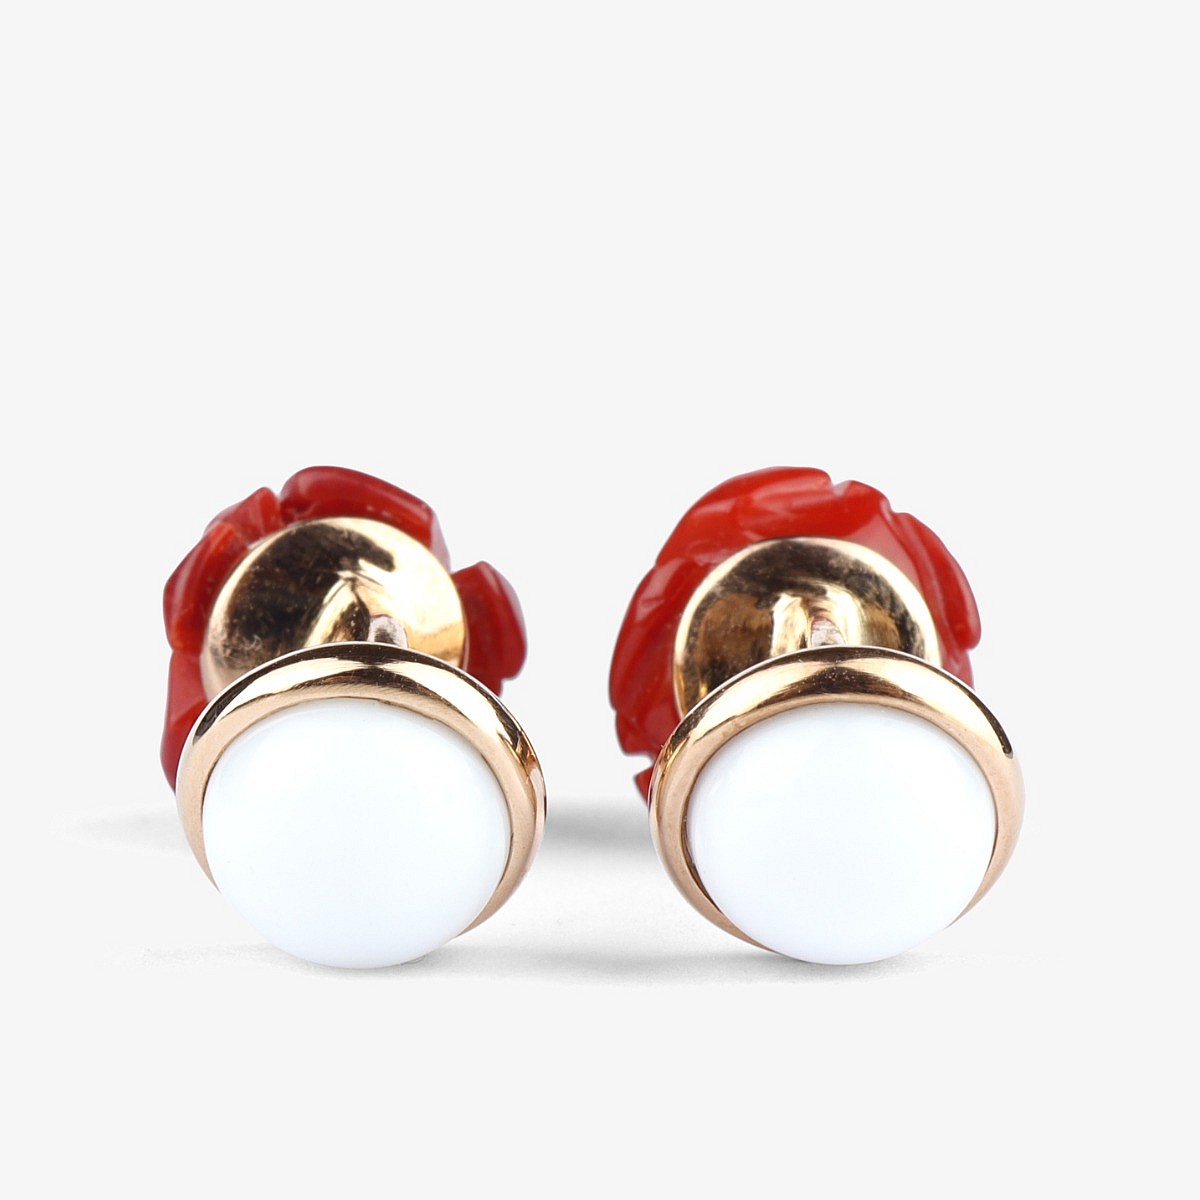 Barbarulo rose red madrepore sterling silver gold cufflinks